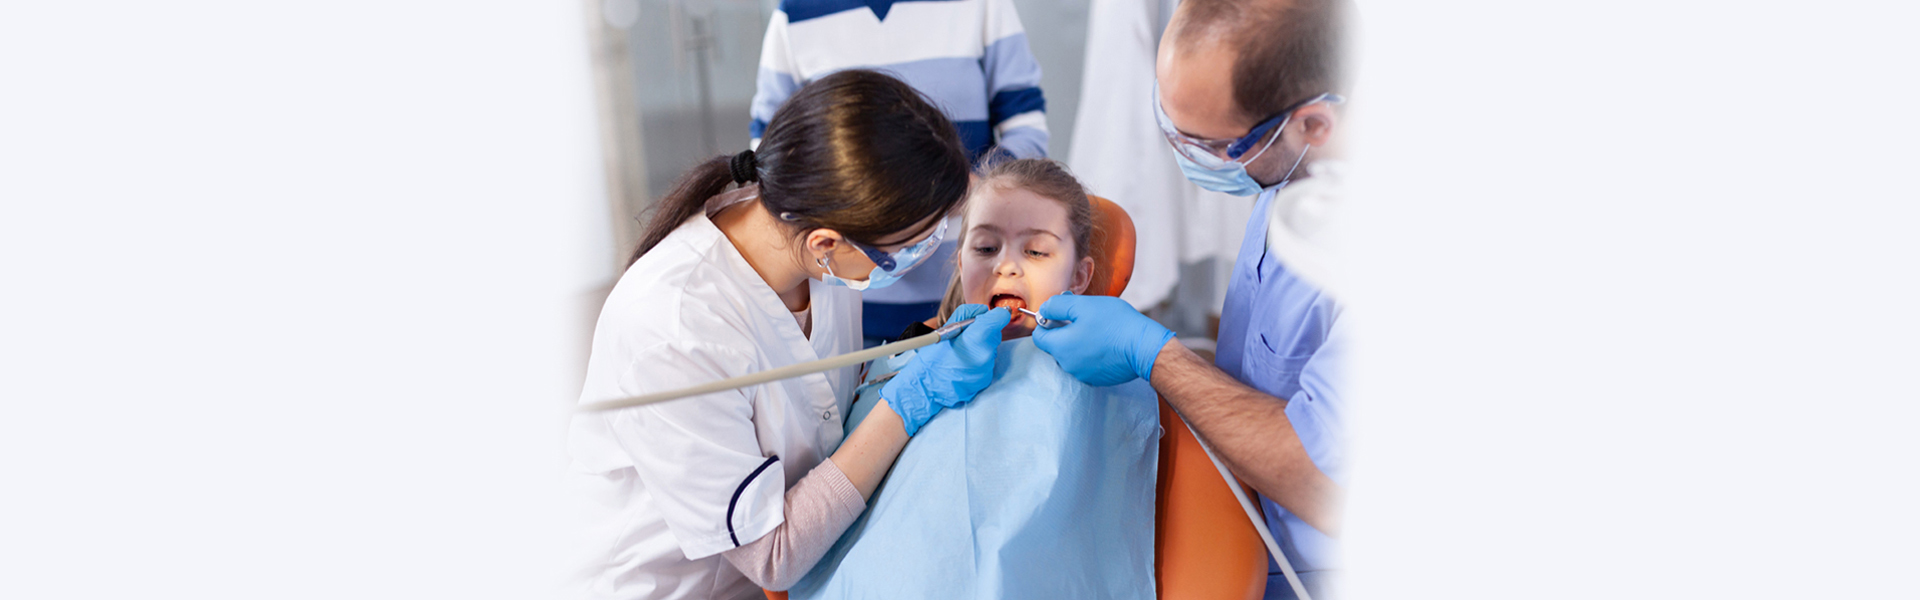 Preventing Childhood Cavities: Advice from a Pediatric Dentist in Tracy